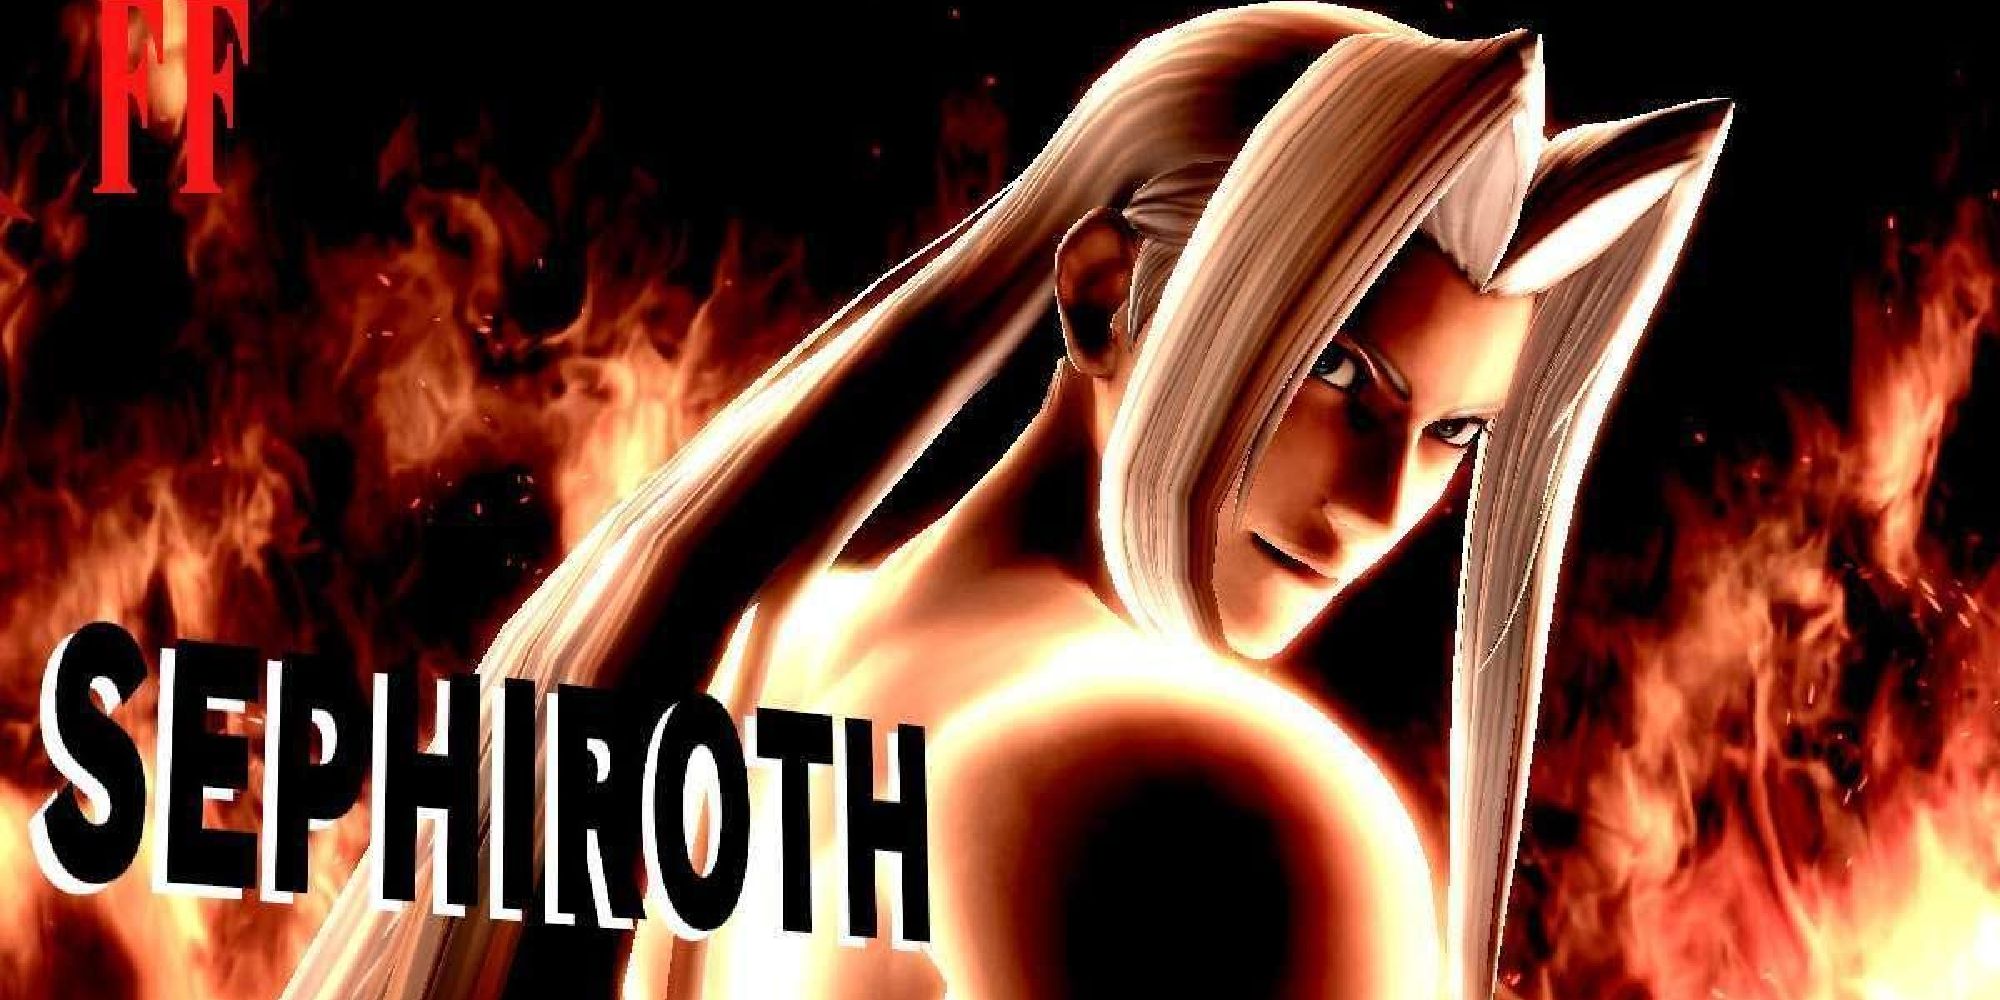 A shirtless Sephiroth looking back in front of a fiery arena